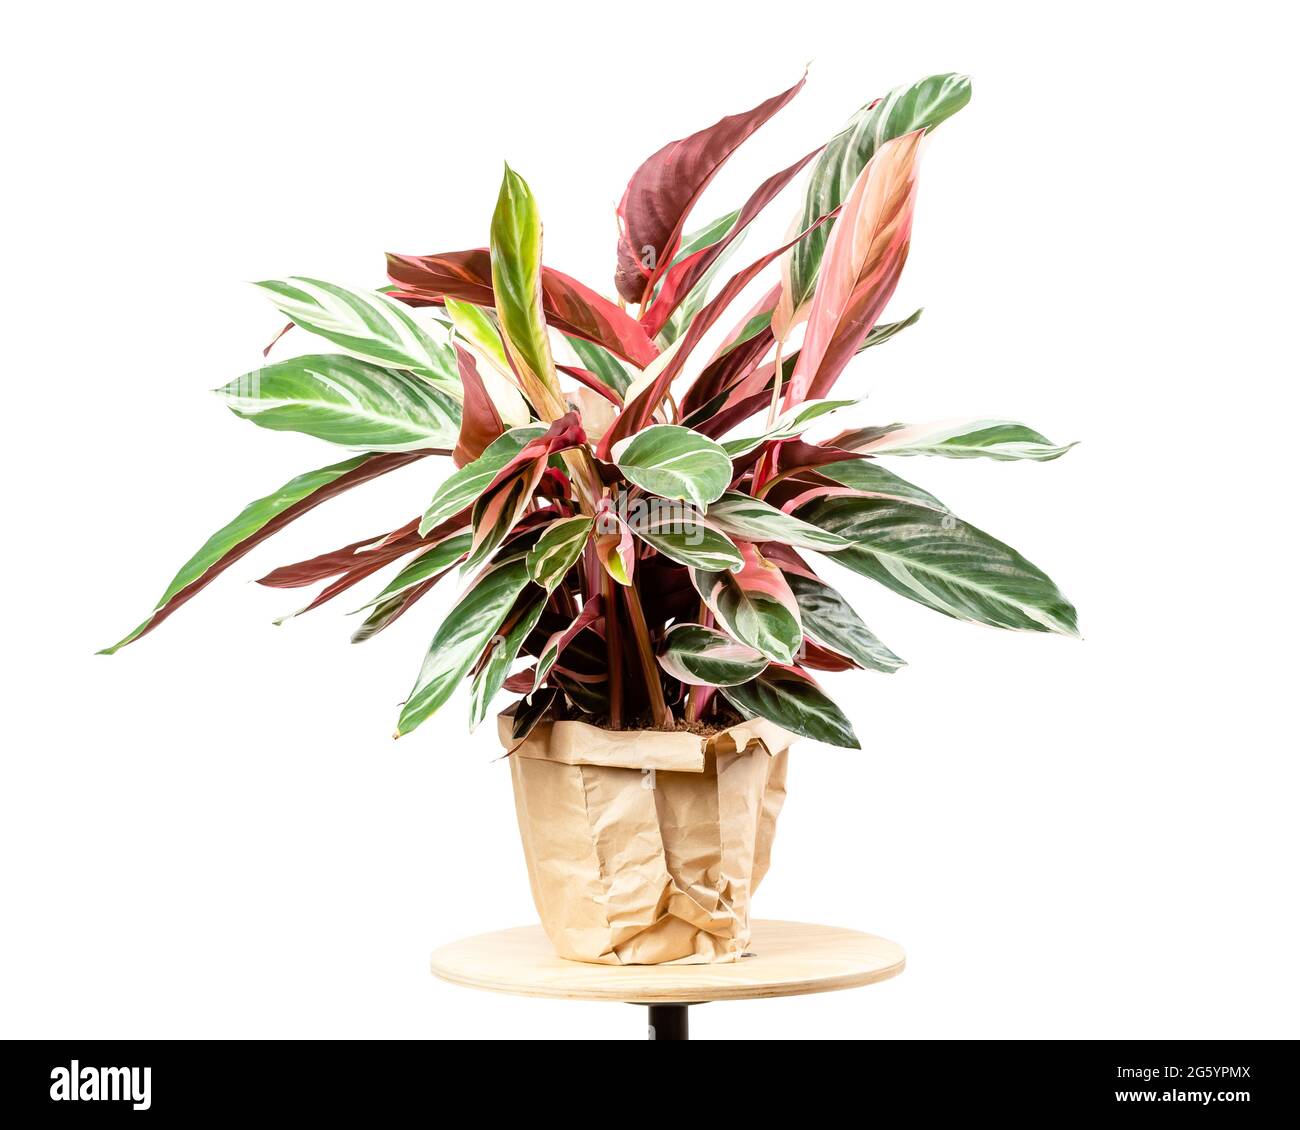 Exotic Calathea Stromanthe Sanguinea Triostar or Tricolor plant leaves with white variegation spot pattern on top and dark pink leaf bottom isolated o Stock Photo